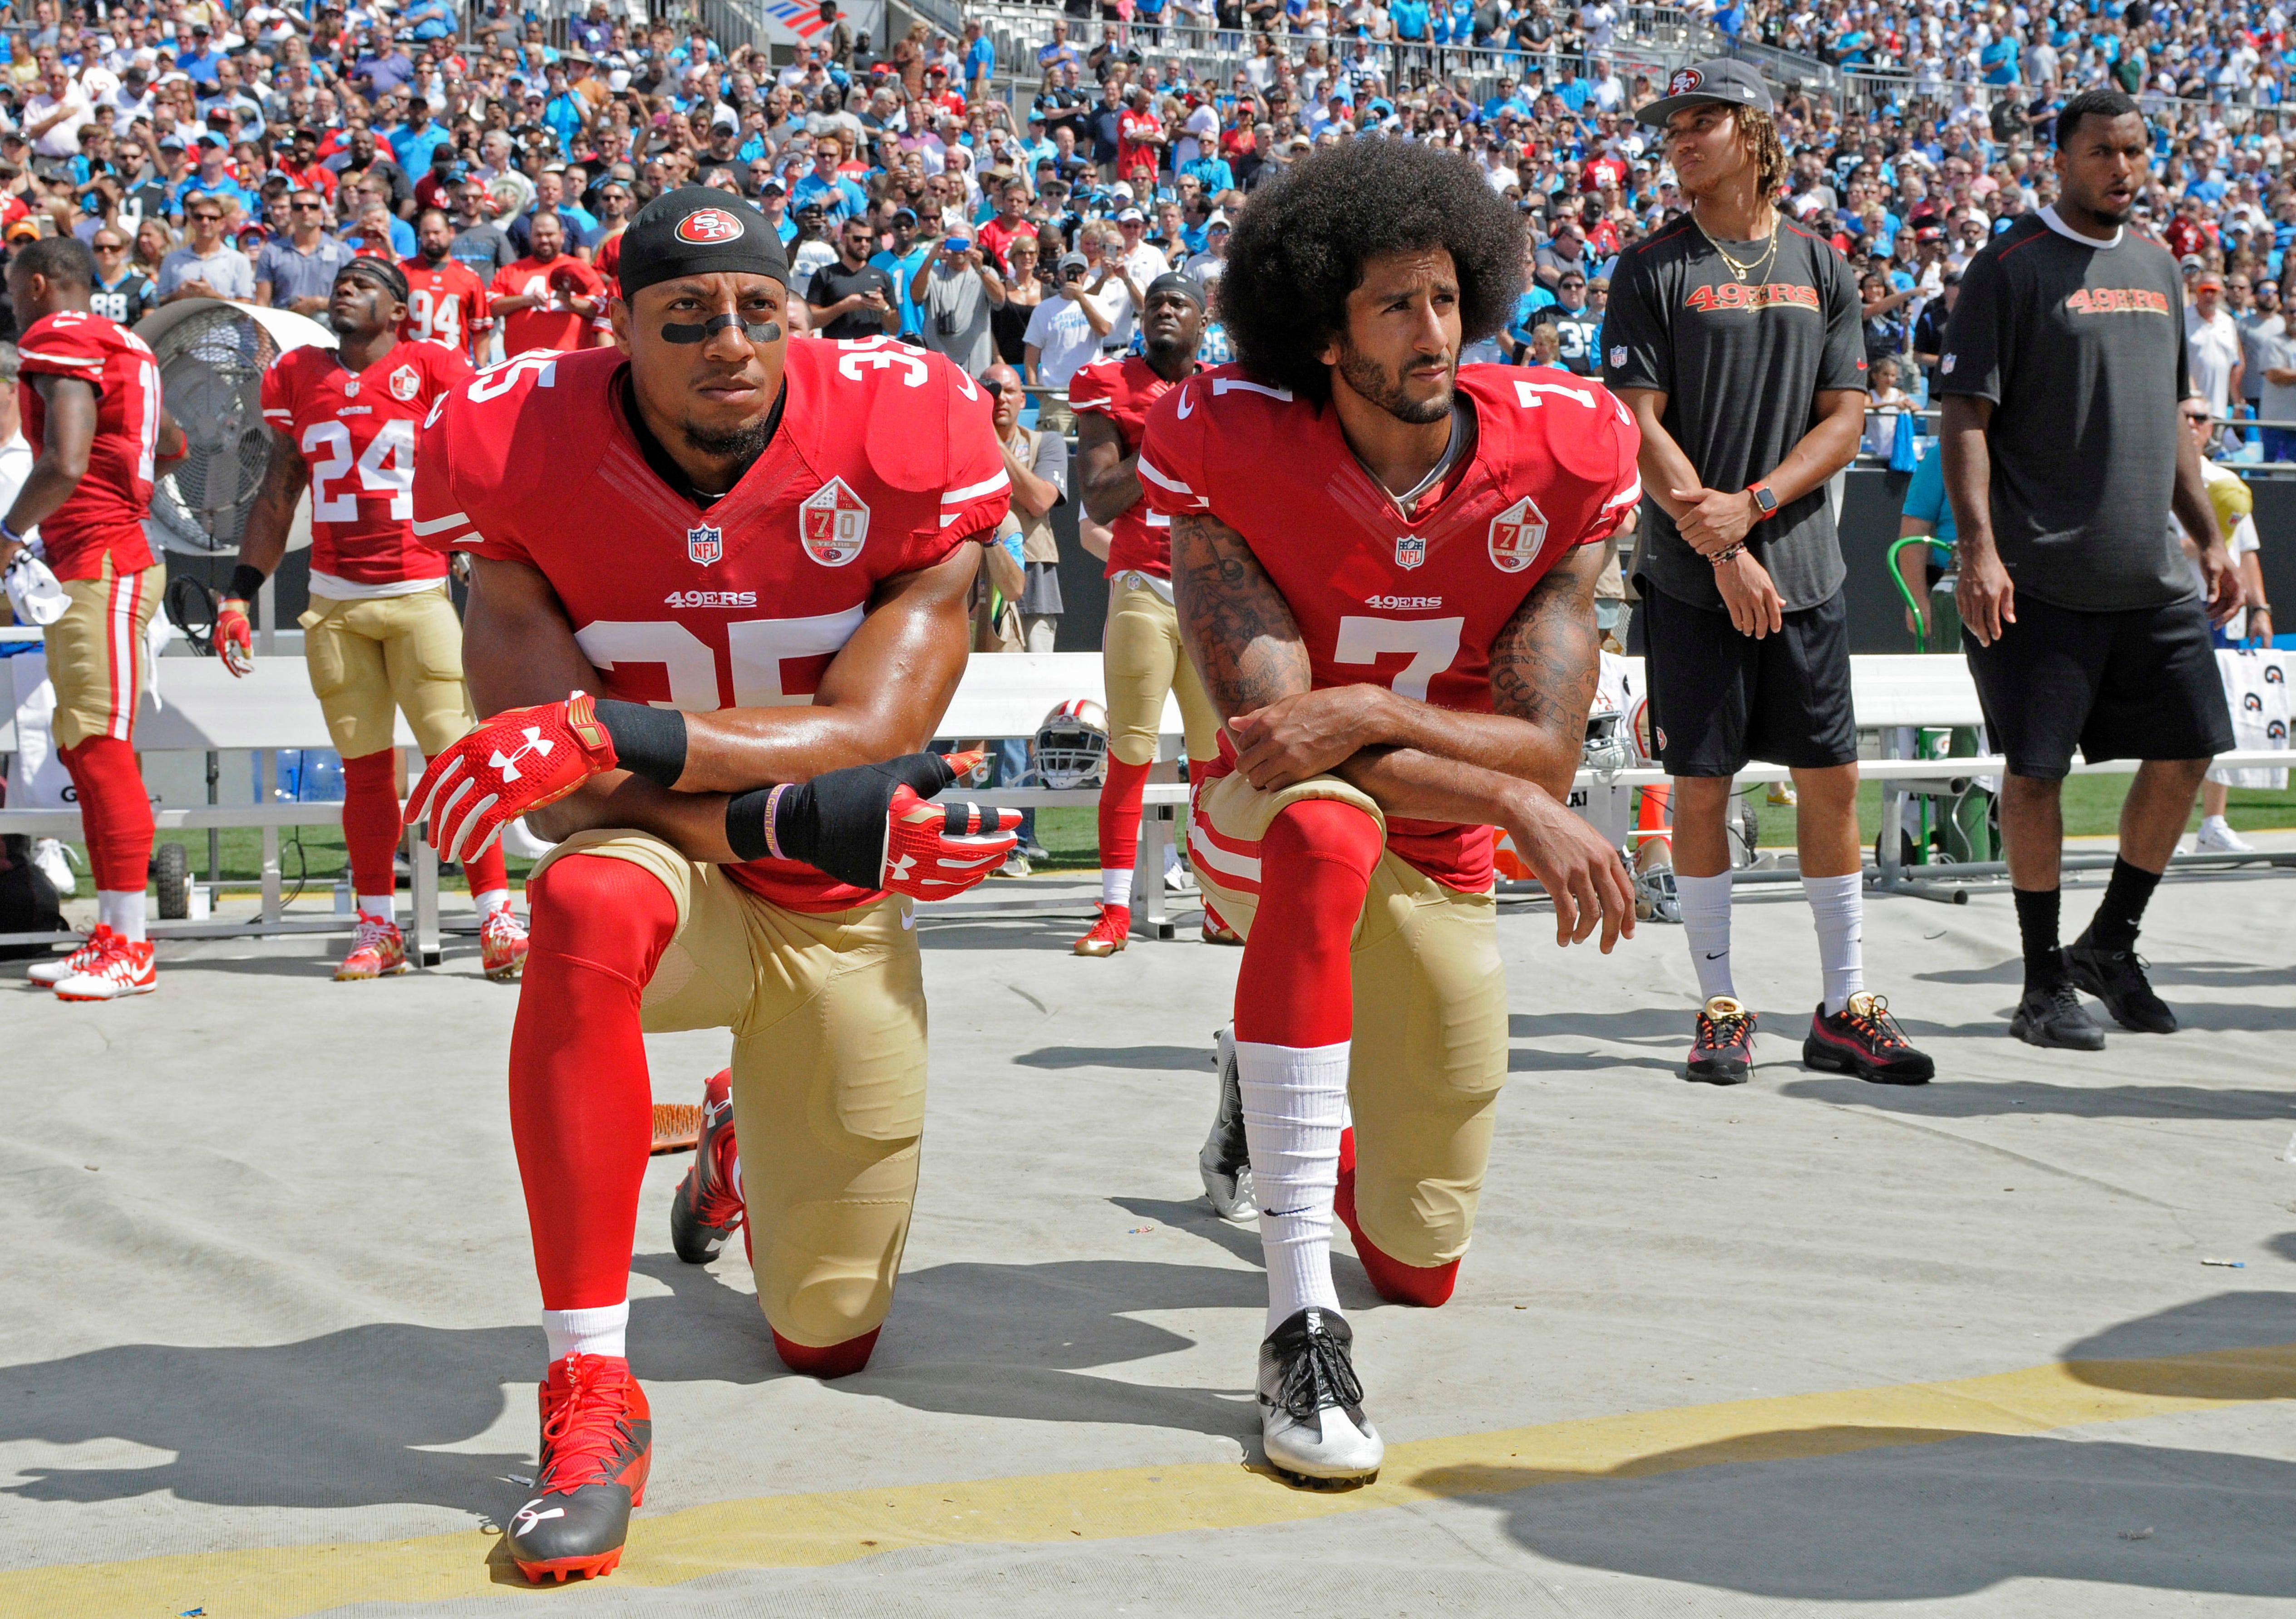 Colin Kaepernick (right) and Eric Reid kneel while singing the national anthem before the game at the San Francisco 49ers-Carolina Panthers on September 18, 2016.